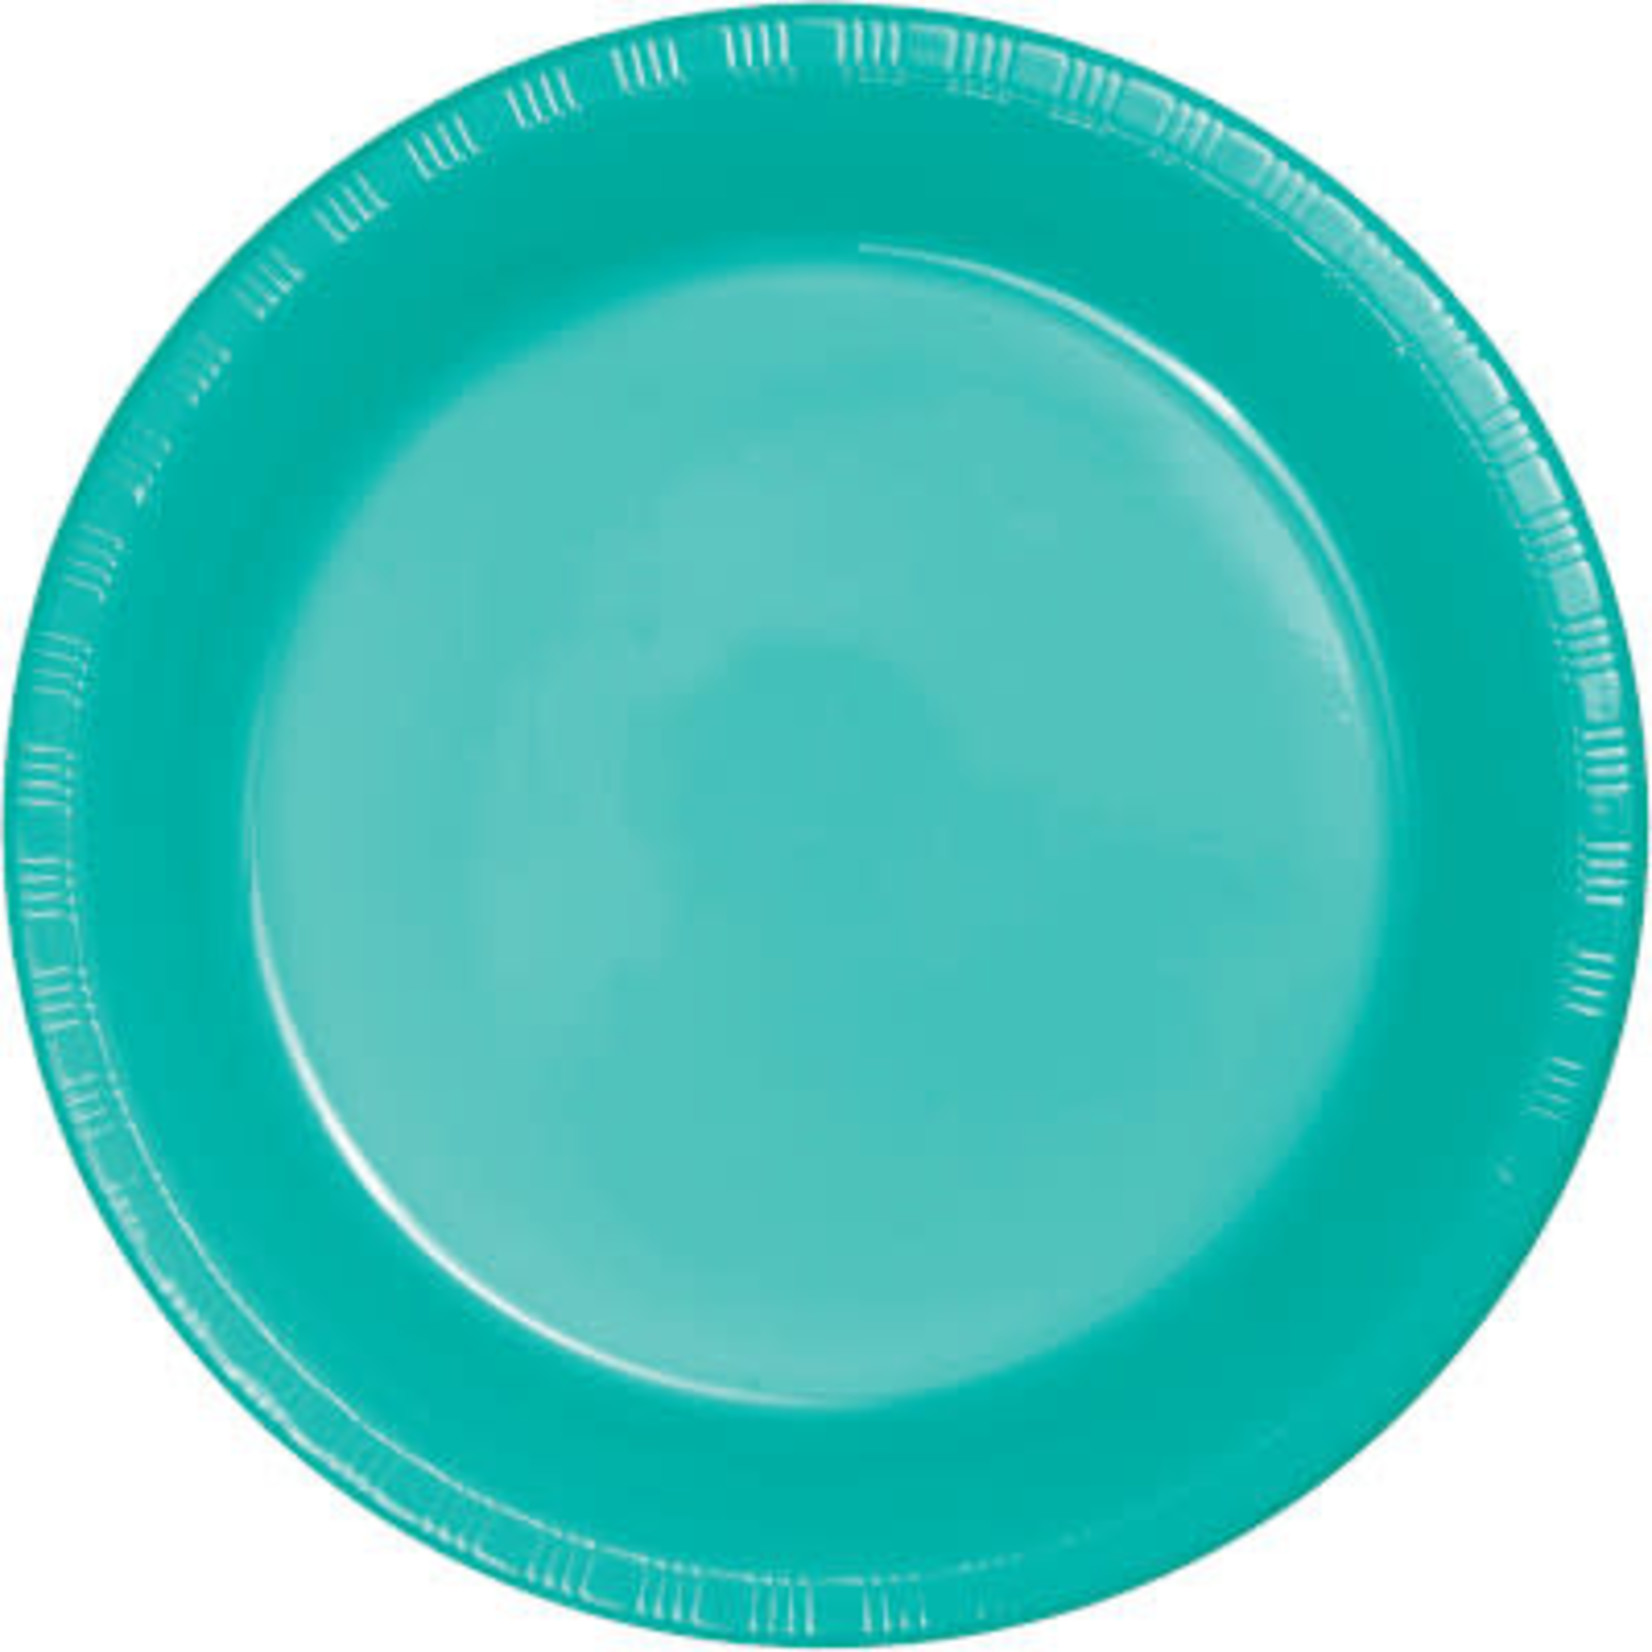 Touch of Color 7" Teal Lagoon Plastic Plates - 20ct.